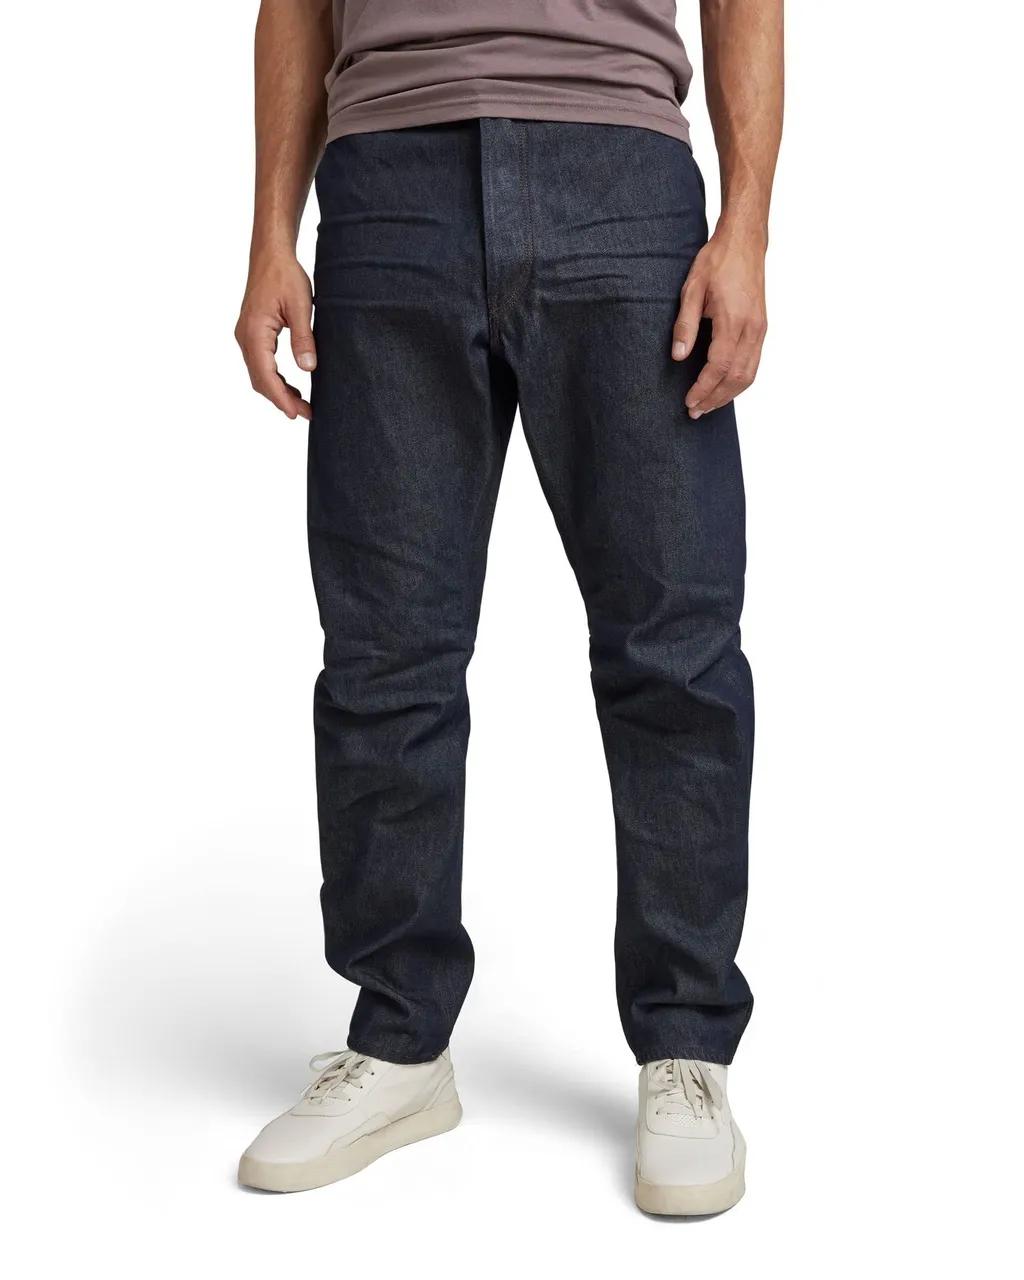 G-STAR RAW Men's Grip 3d Relaxed Tapered Jeans Jeans